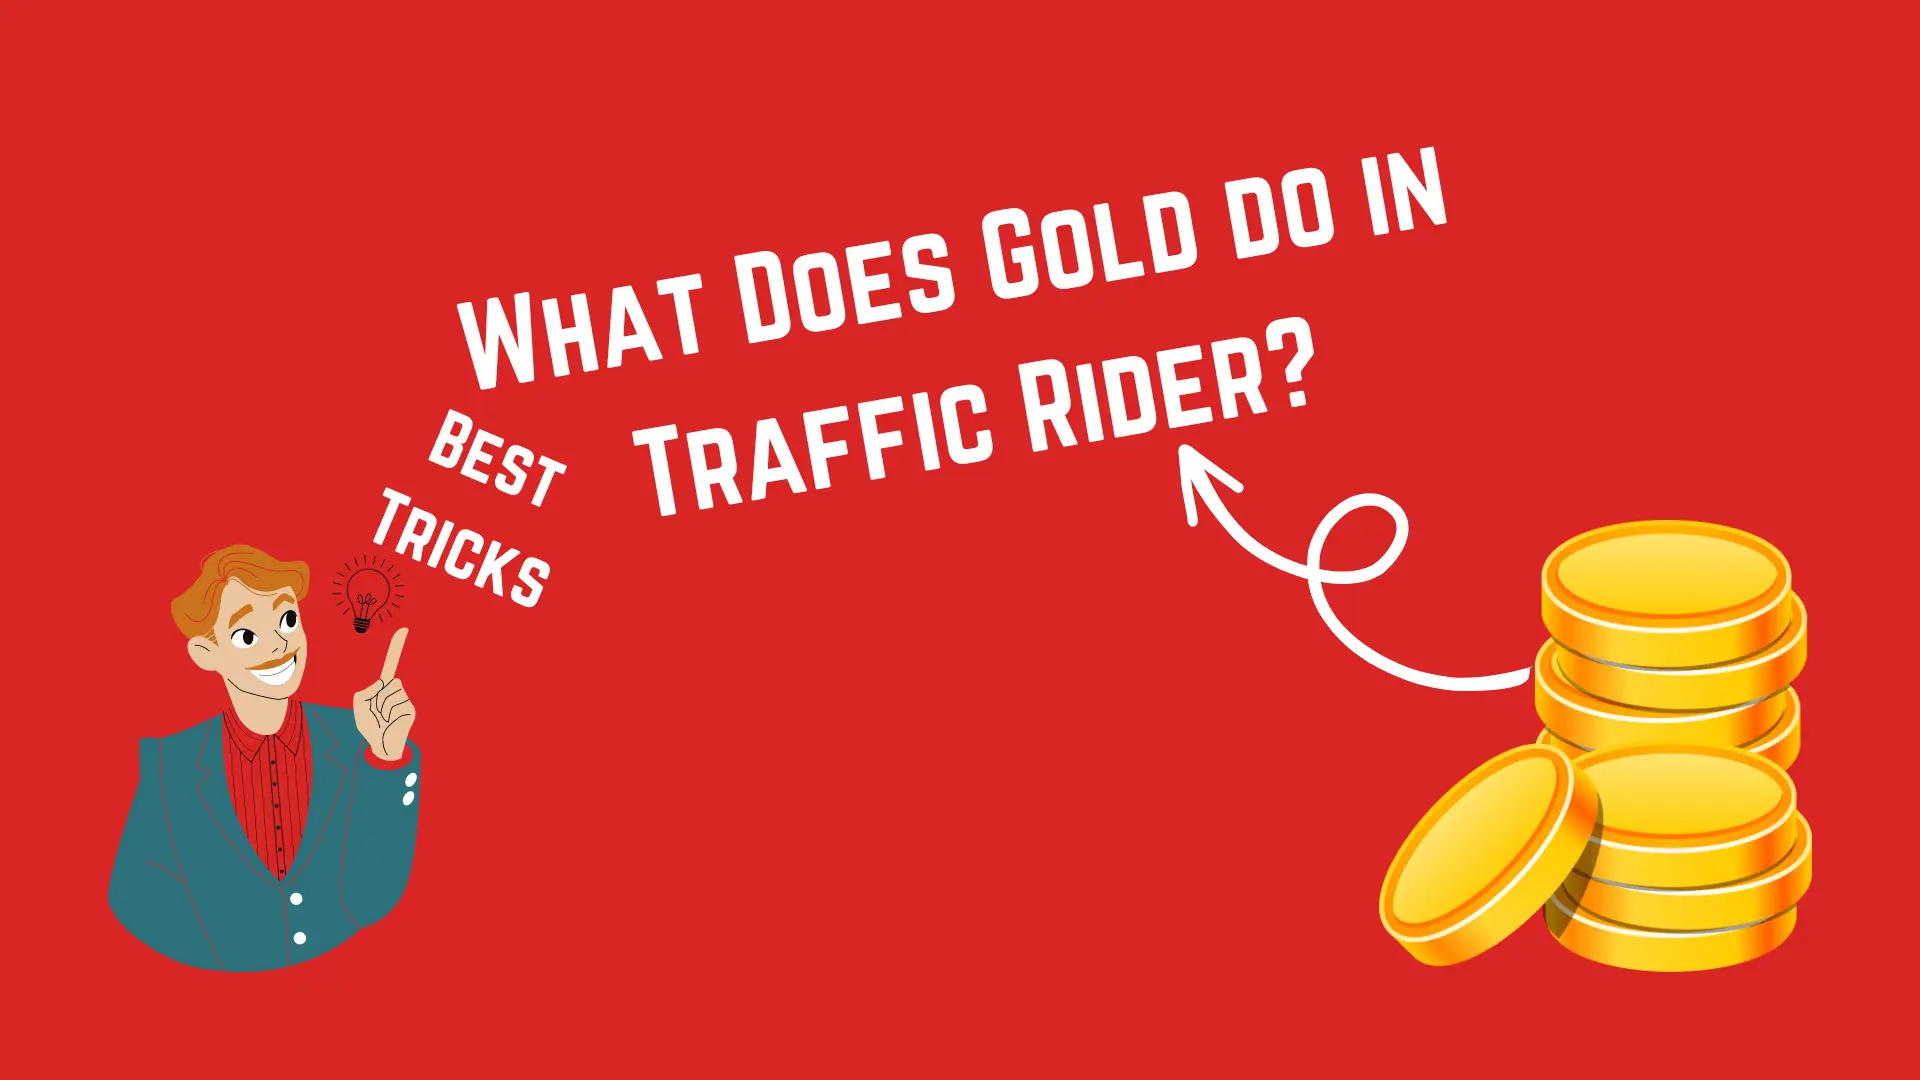 Traffic Rider MOD APK - WHAT DOES GOLD DO IN TRAFFIC RIDER